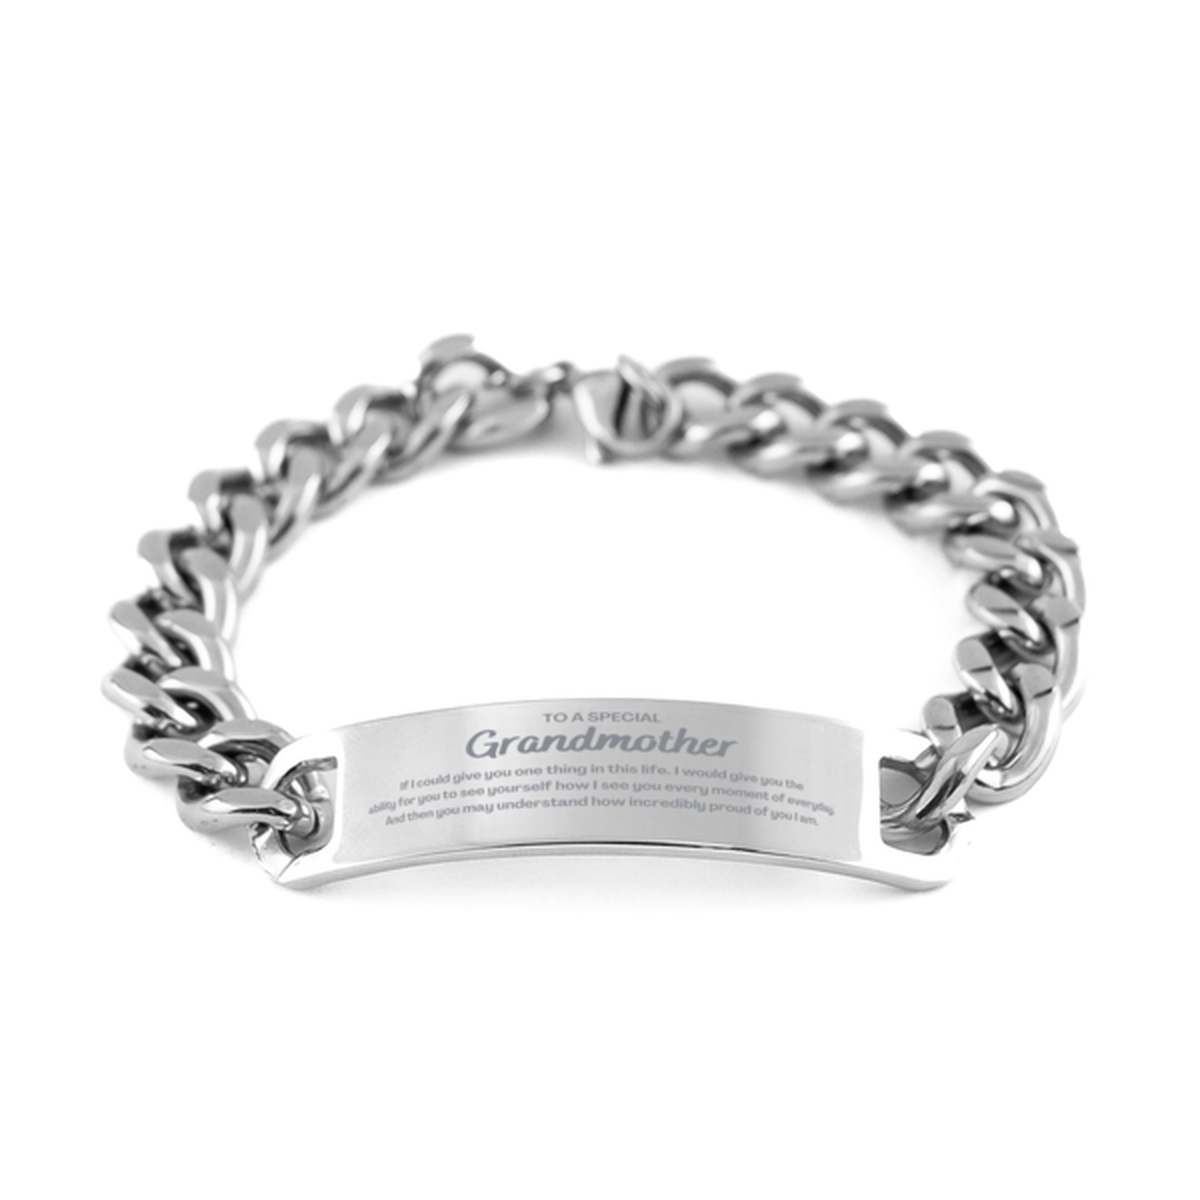 To My Grandmother Cuban Chain Stainless Steel Bracelet, Gifts For Grandmother Engraved, Inspirational Gifts for Christmas Birthday, Epic Gifts for Grandmother To A Special Grandmother how incredibly proud of you I am